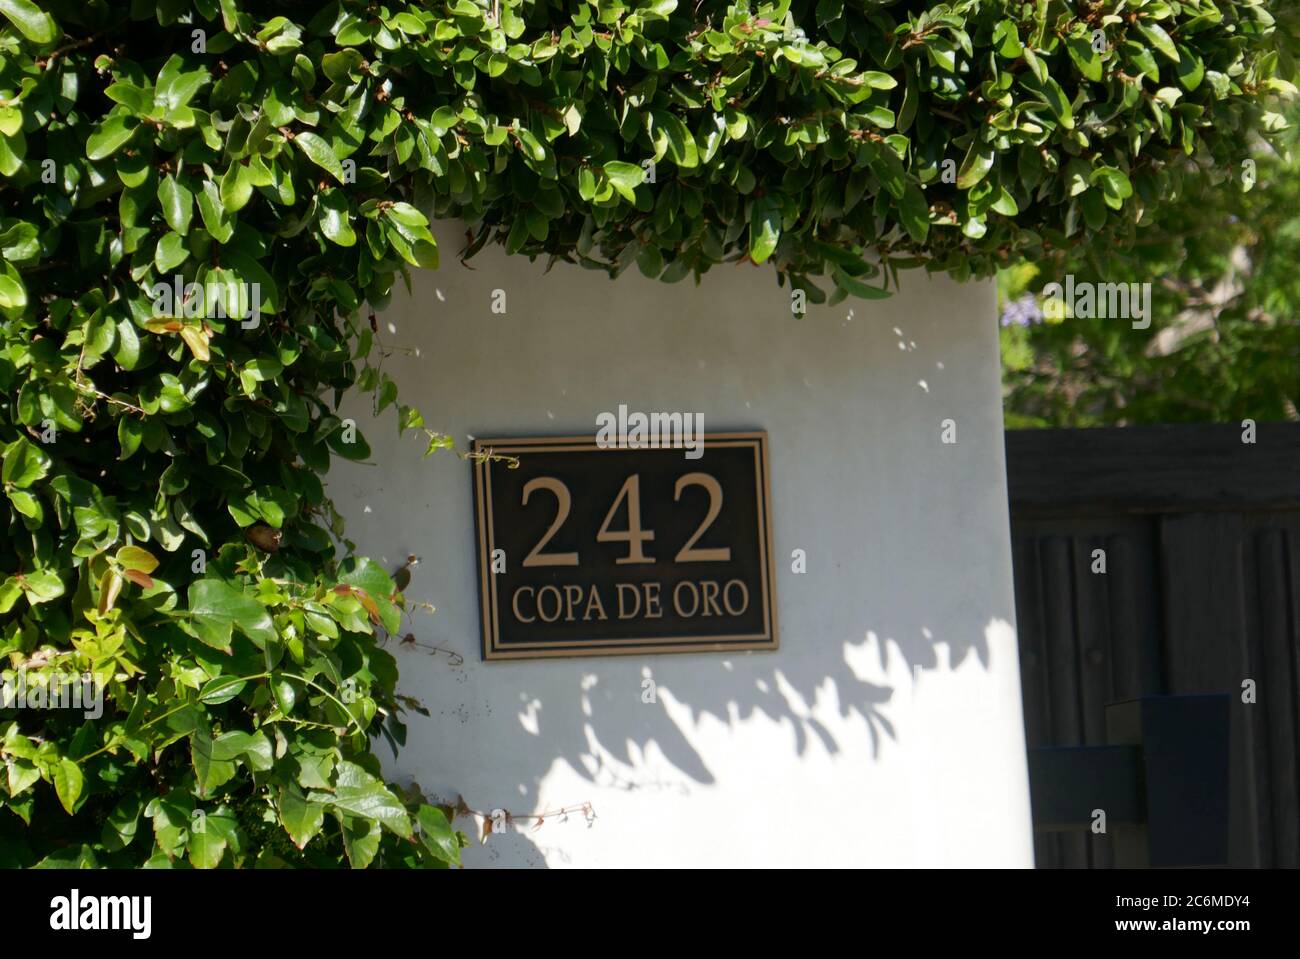 Los Angeles, California, USA 10th July 2020 A general view of atmosphere of Elizabeth Taylor, Paul Newman, Joanne Woodward, Henry Fonda and Tyrone Power's former home at 242 Copa De Oro Road in Bel Air on July 10, 2020 in Los Angeles, California, USA. Photo by Barry King/Alamy Stock Photo Stock Photo